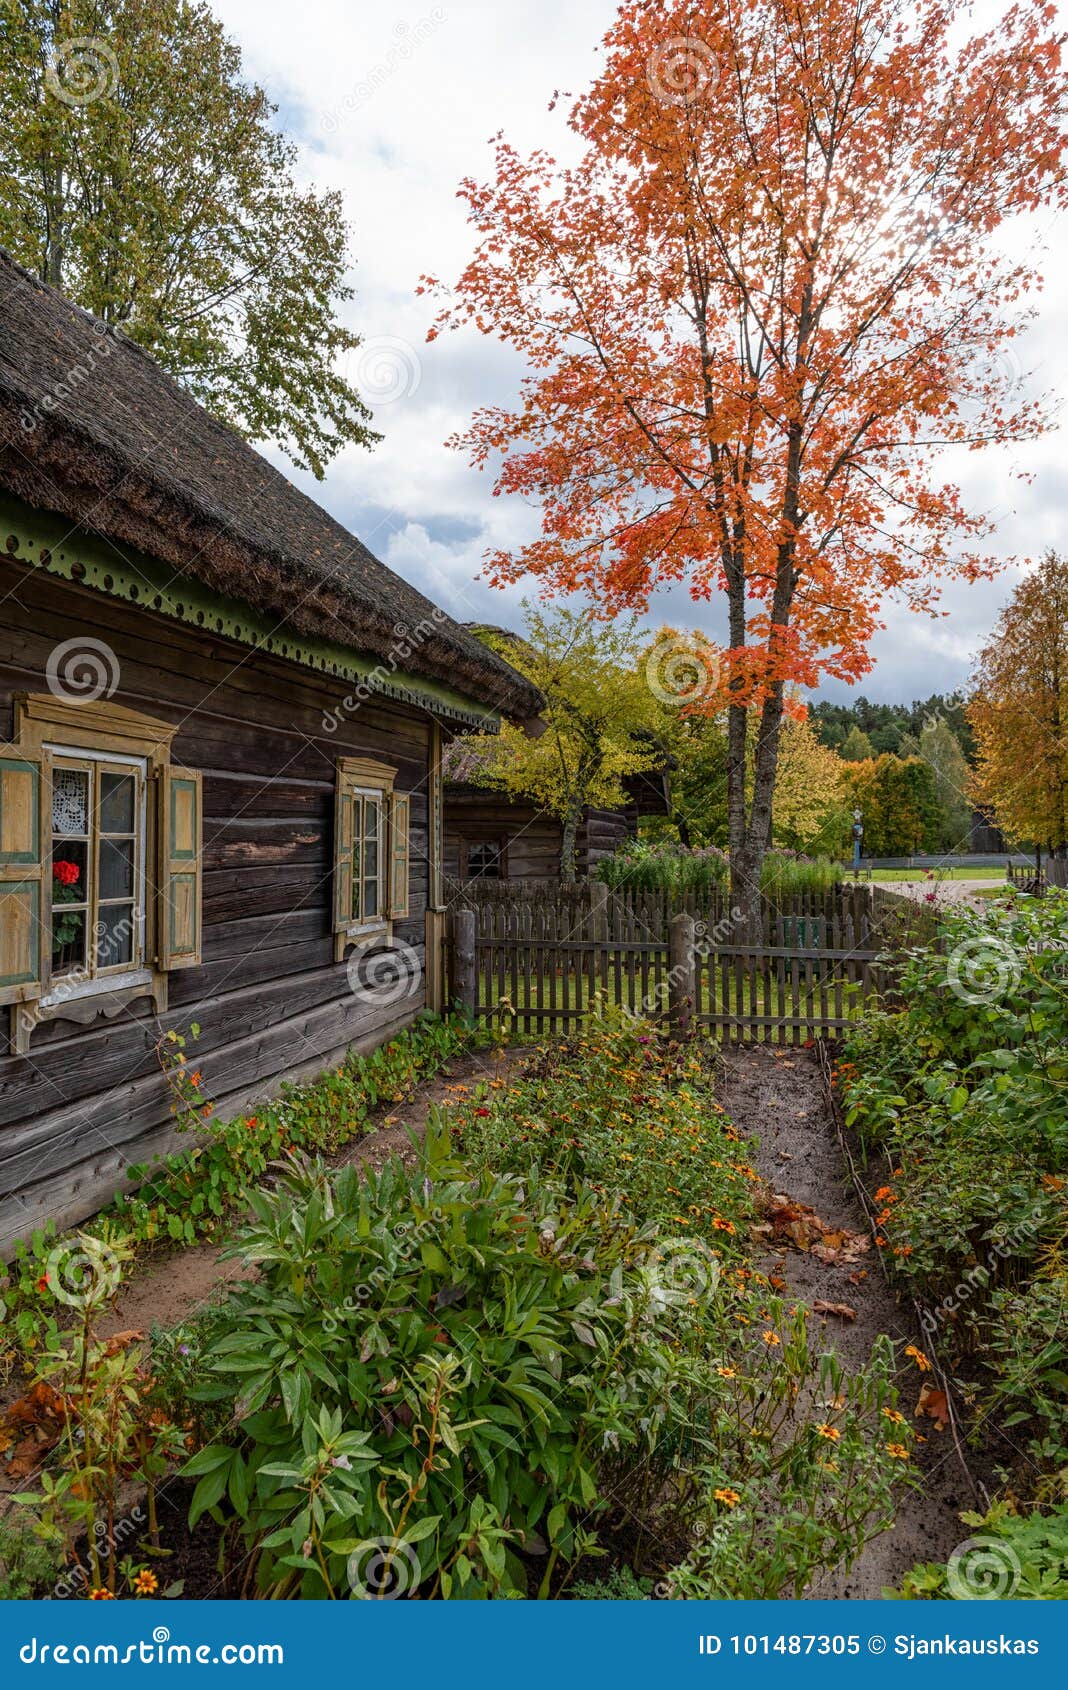 wooden house and garden autumn scene lithuania